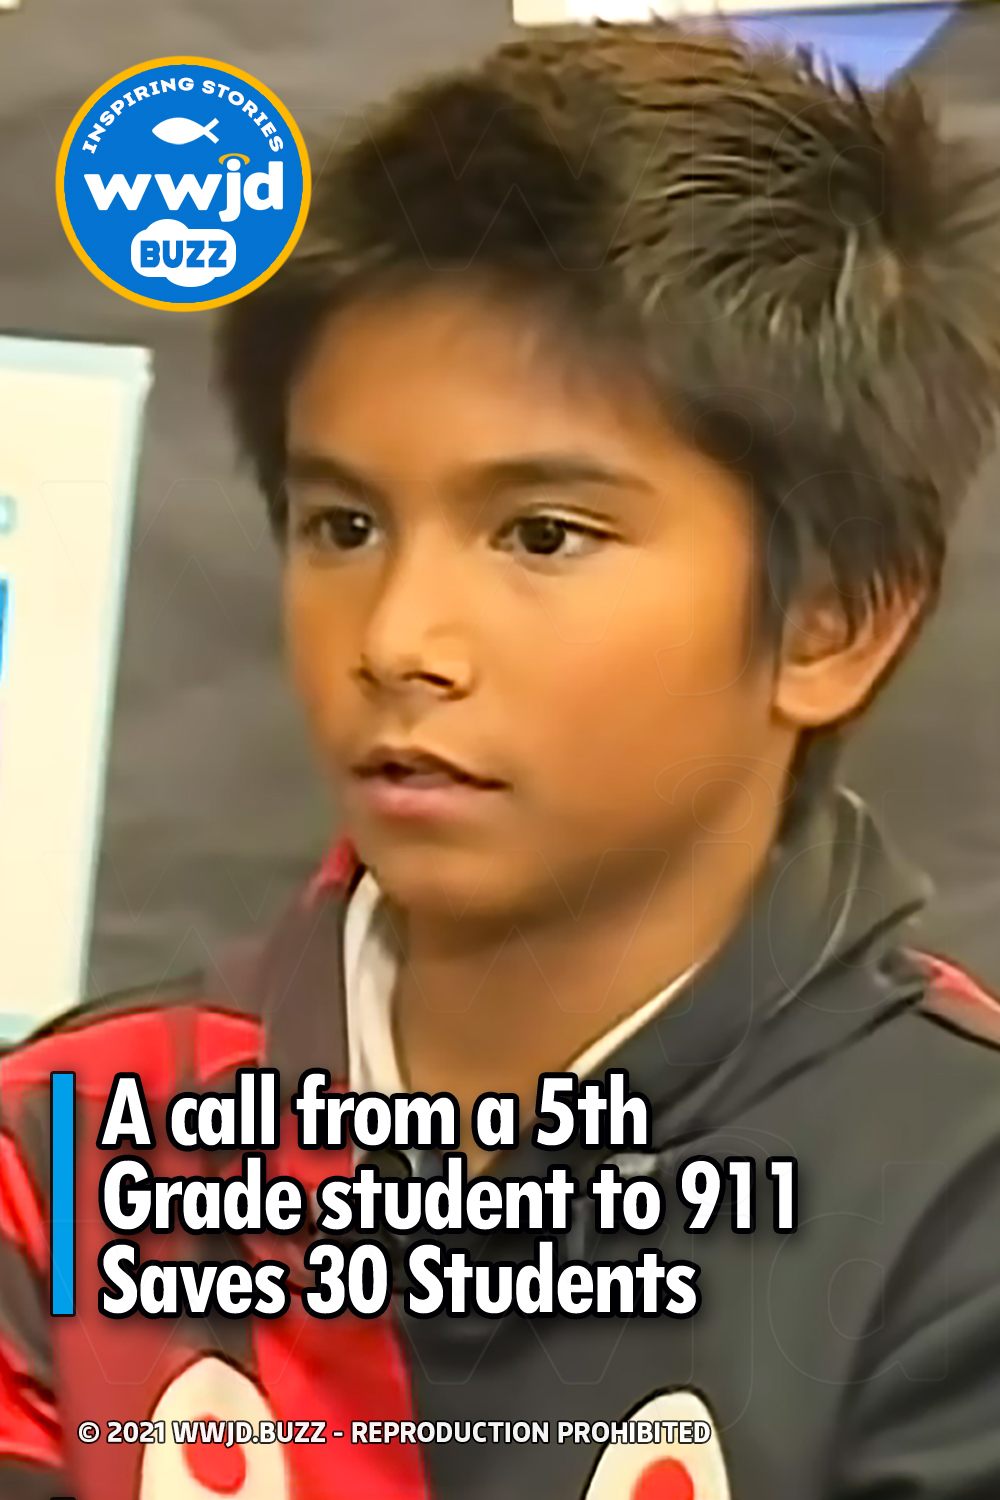 A call from a 5th Grade student to 911 Saves 30 Students